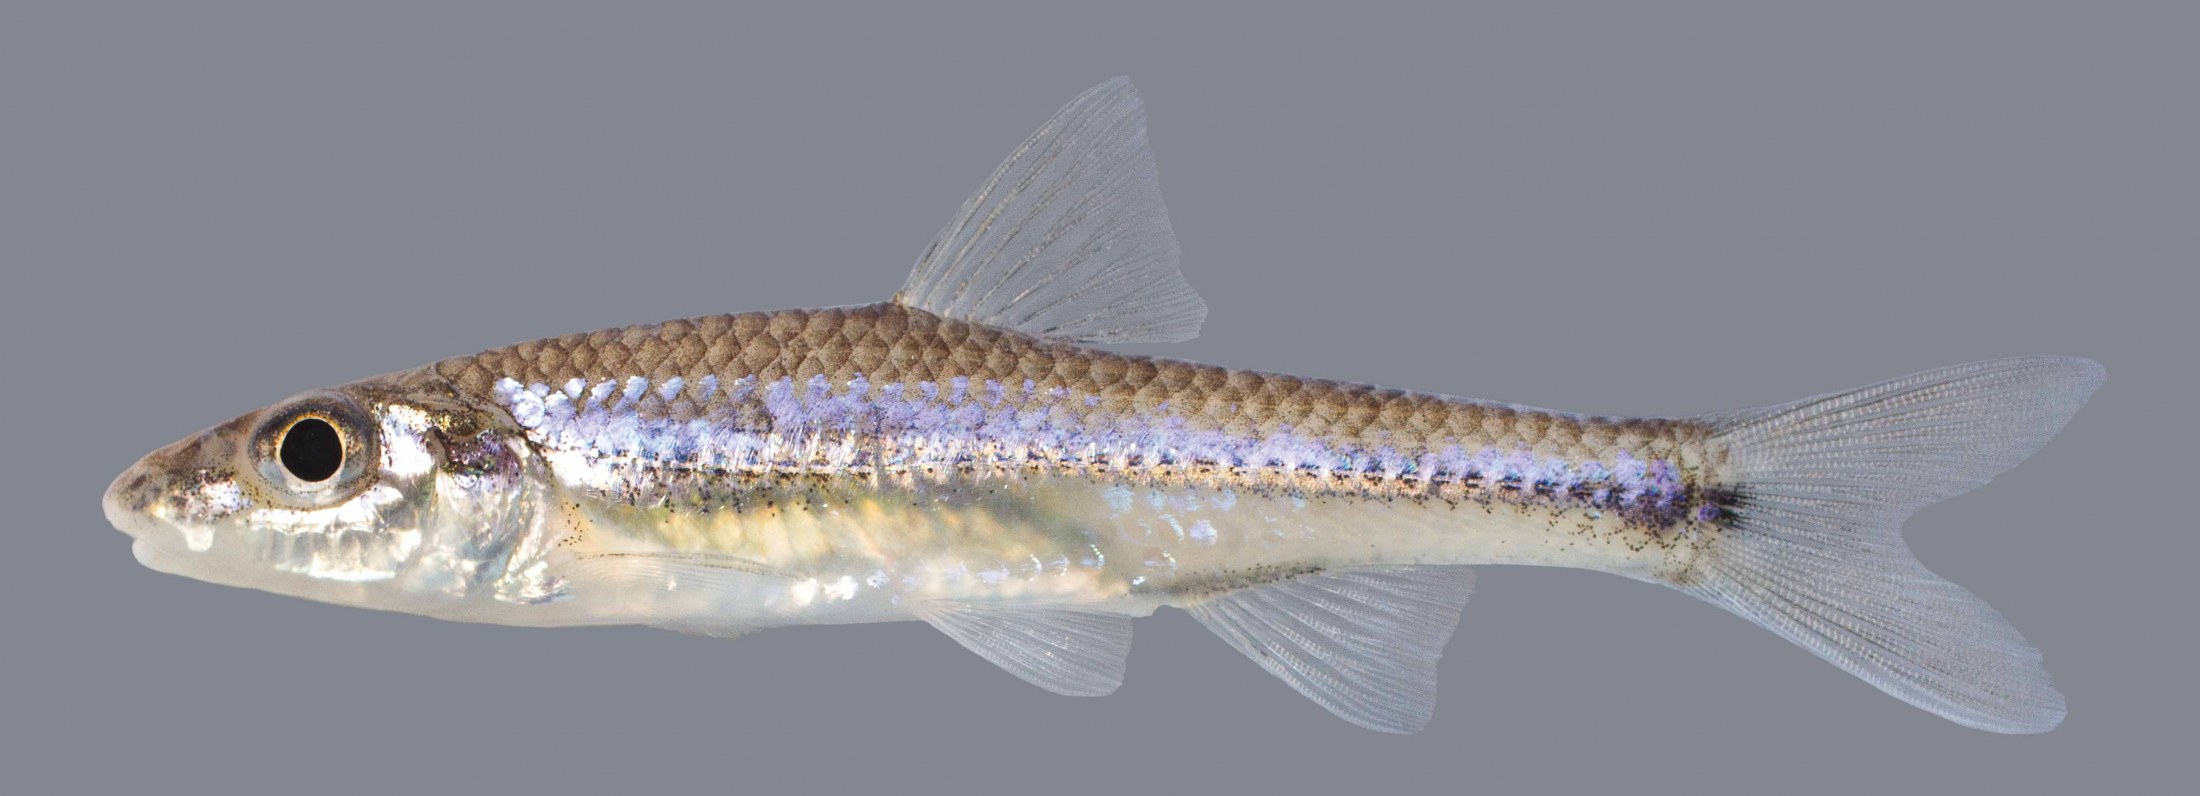 Longjaw Minnow – Discover Fishes